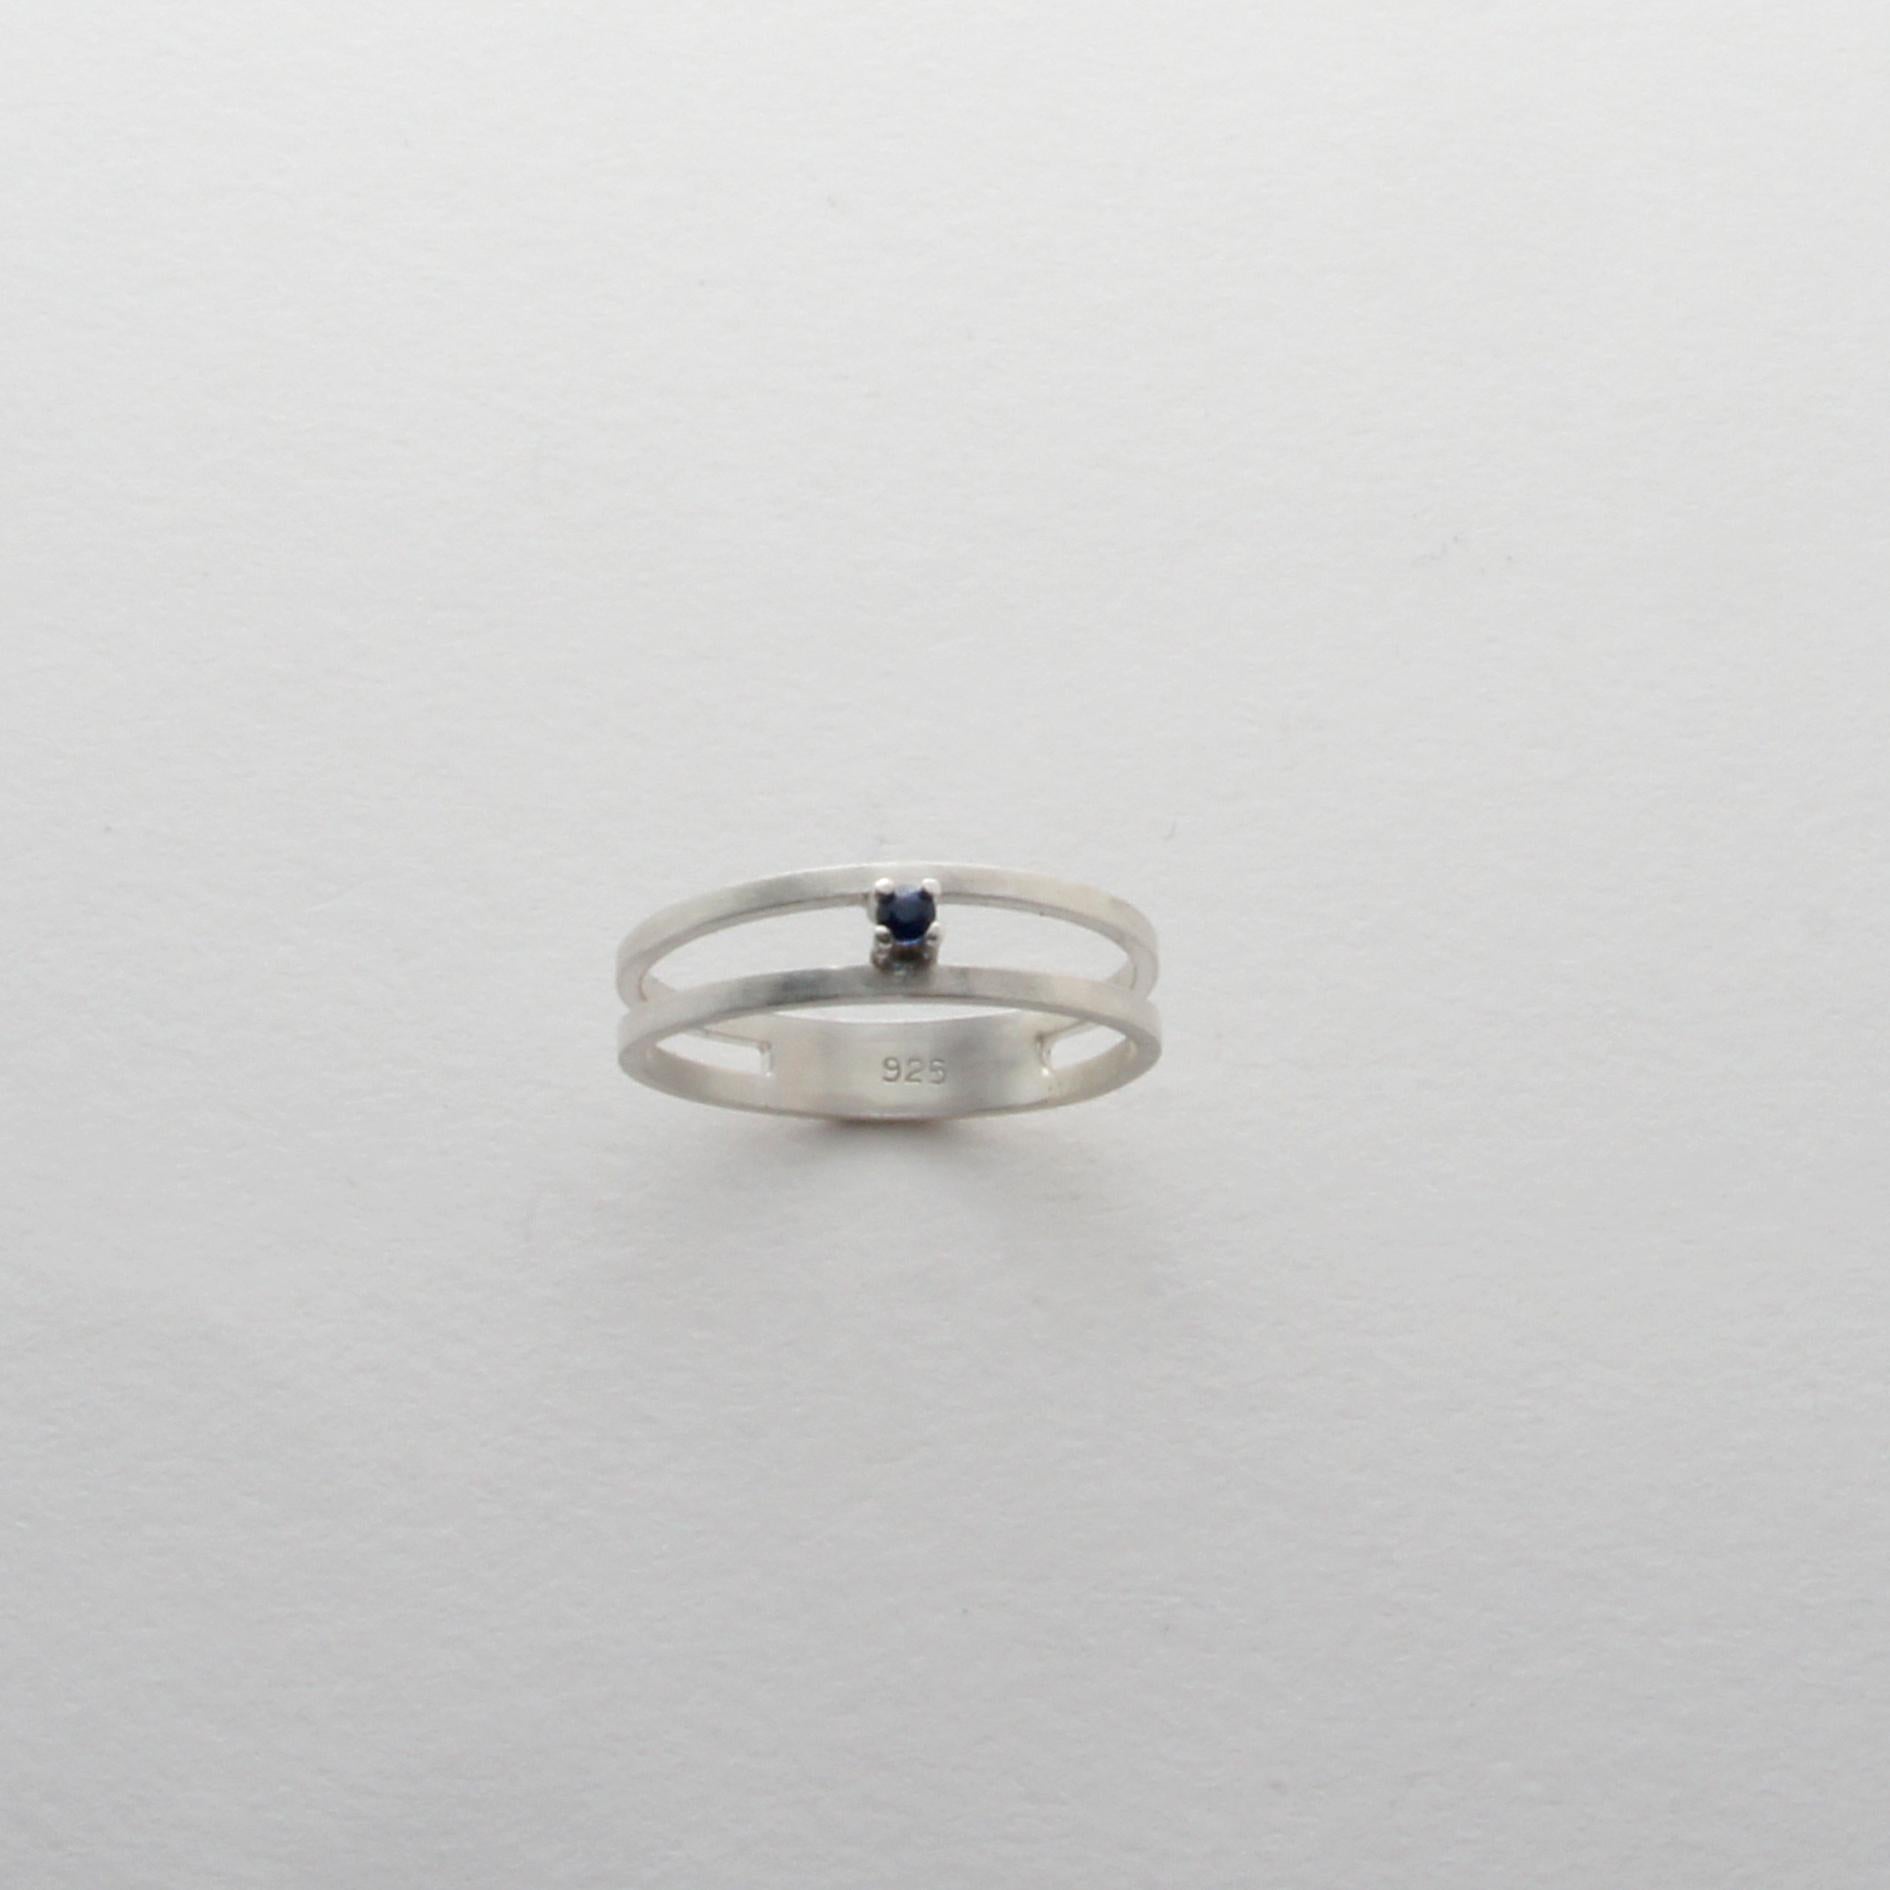 Blue Sapphire Sterling Silver Double Ring US 5.5 For Sale 1